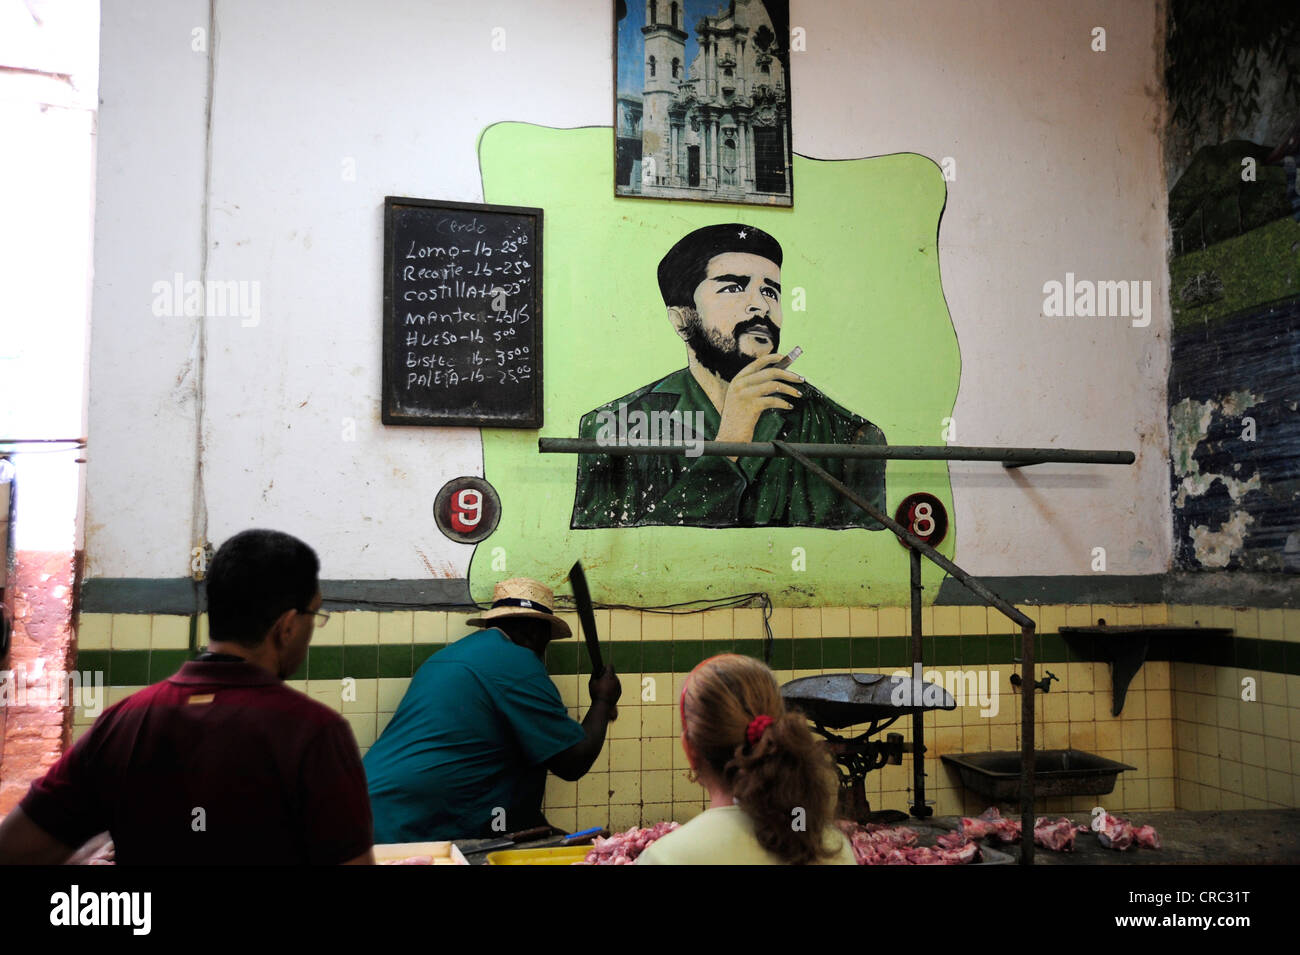 Painting of Che Guevara in a butcher shop, historic city centre of Old Havana, Habana Vieja, Cuba, Greater Antilles, Caribbean Stock Photo